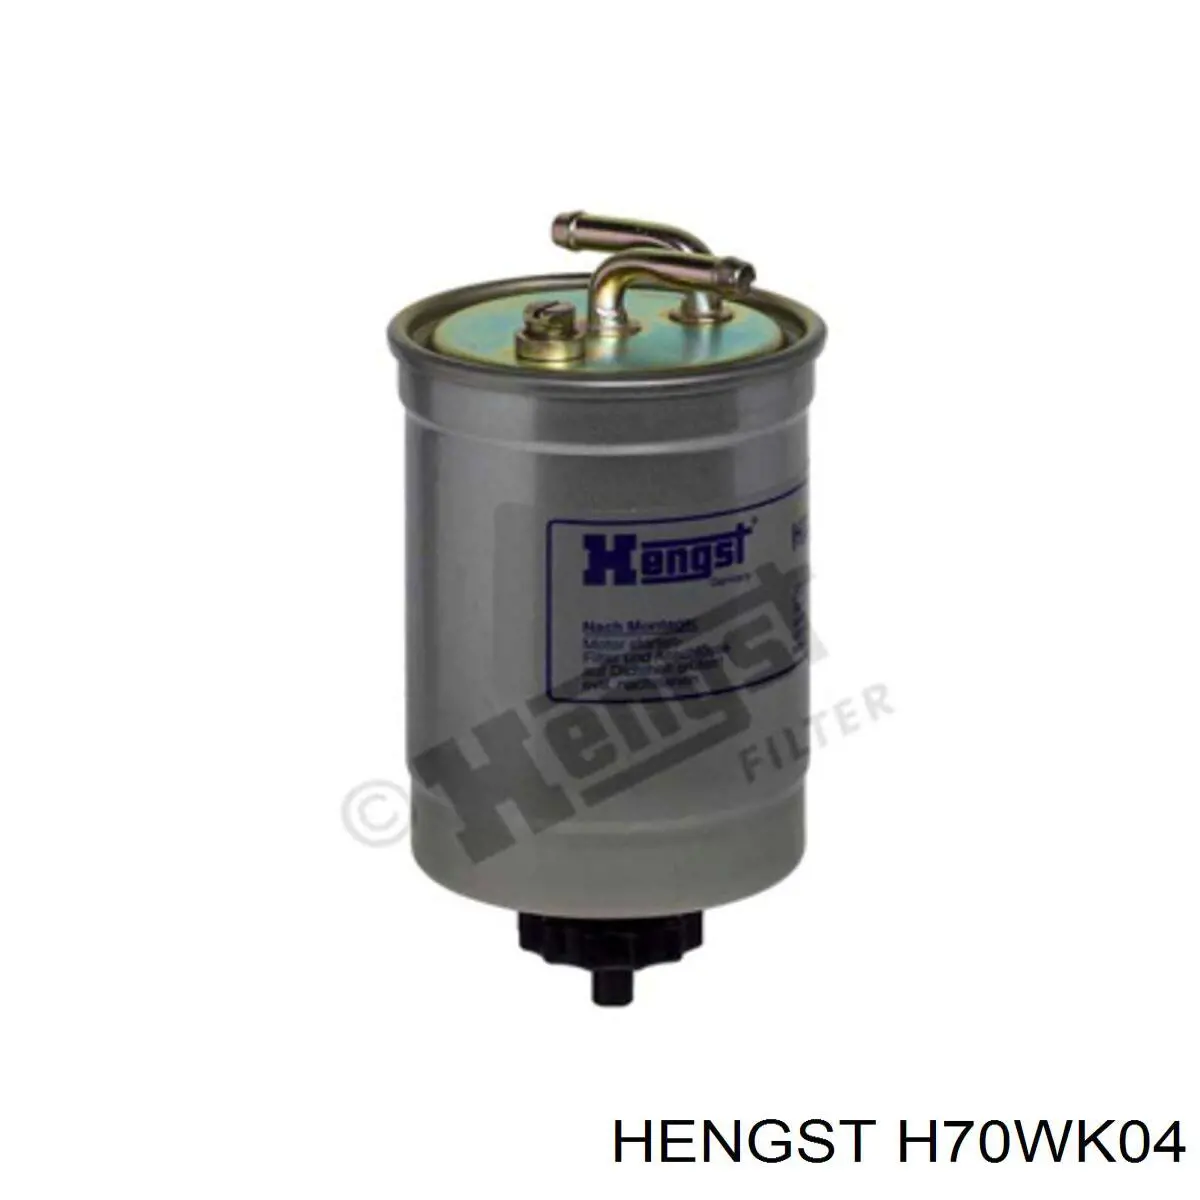 H70WK04 Hengst filtro combustible